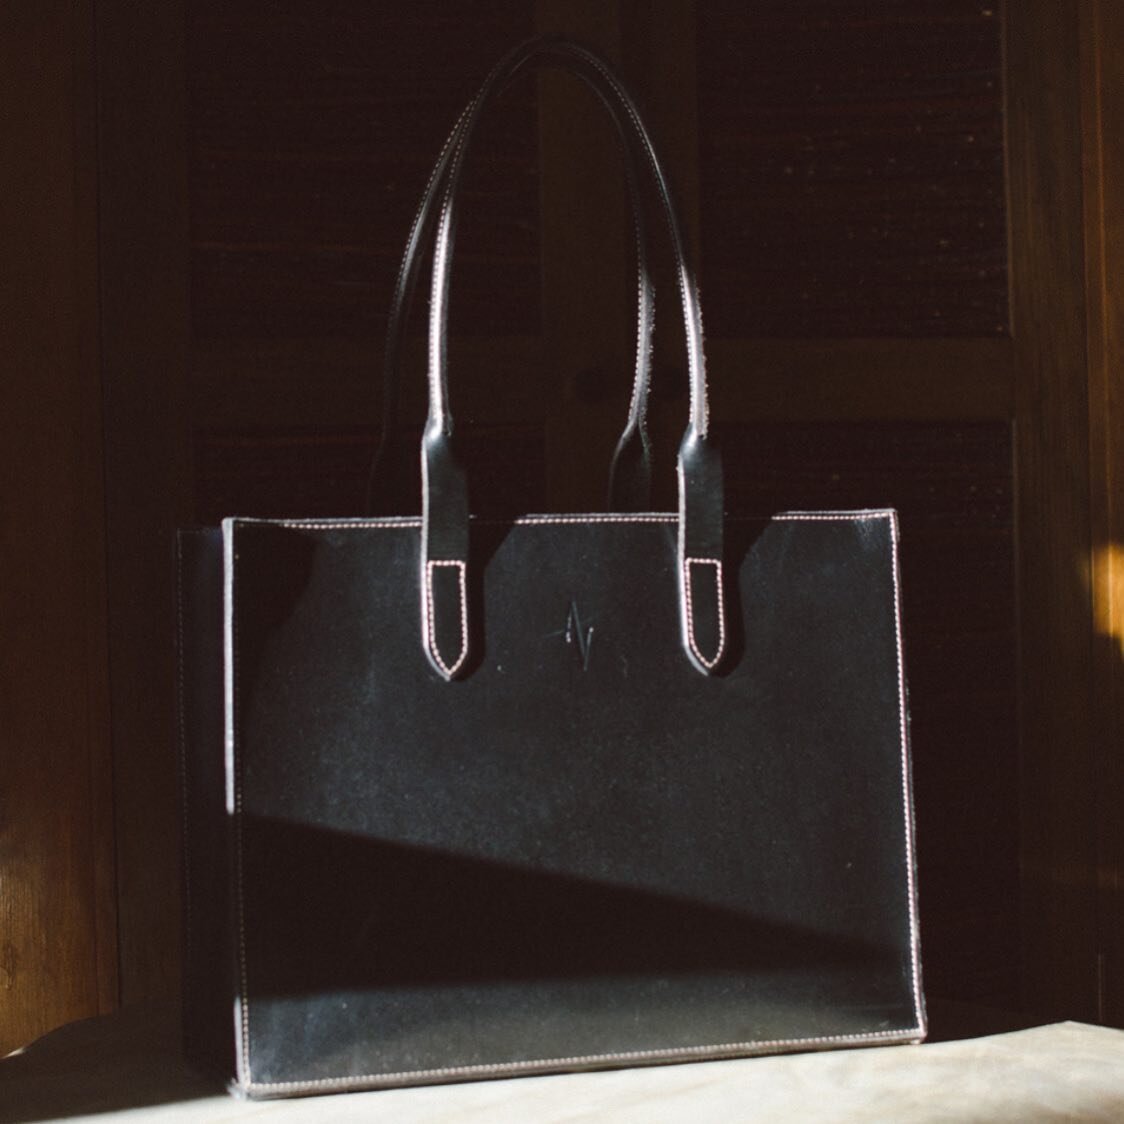 The Perfect Tote in black. ◾️

Photo: @andyrgarcia